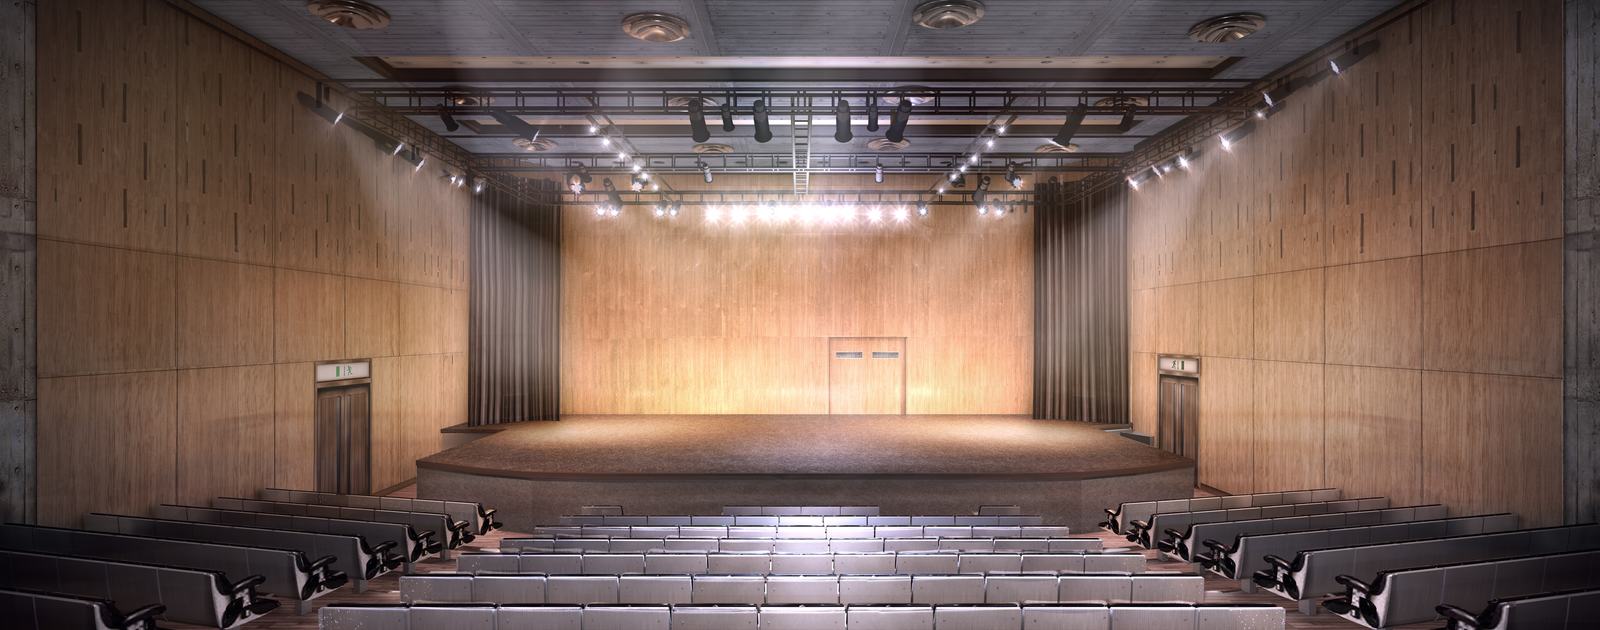 The Refurbished Purcell Room